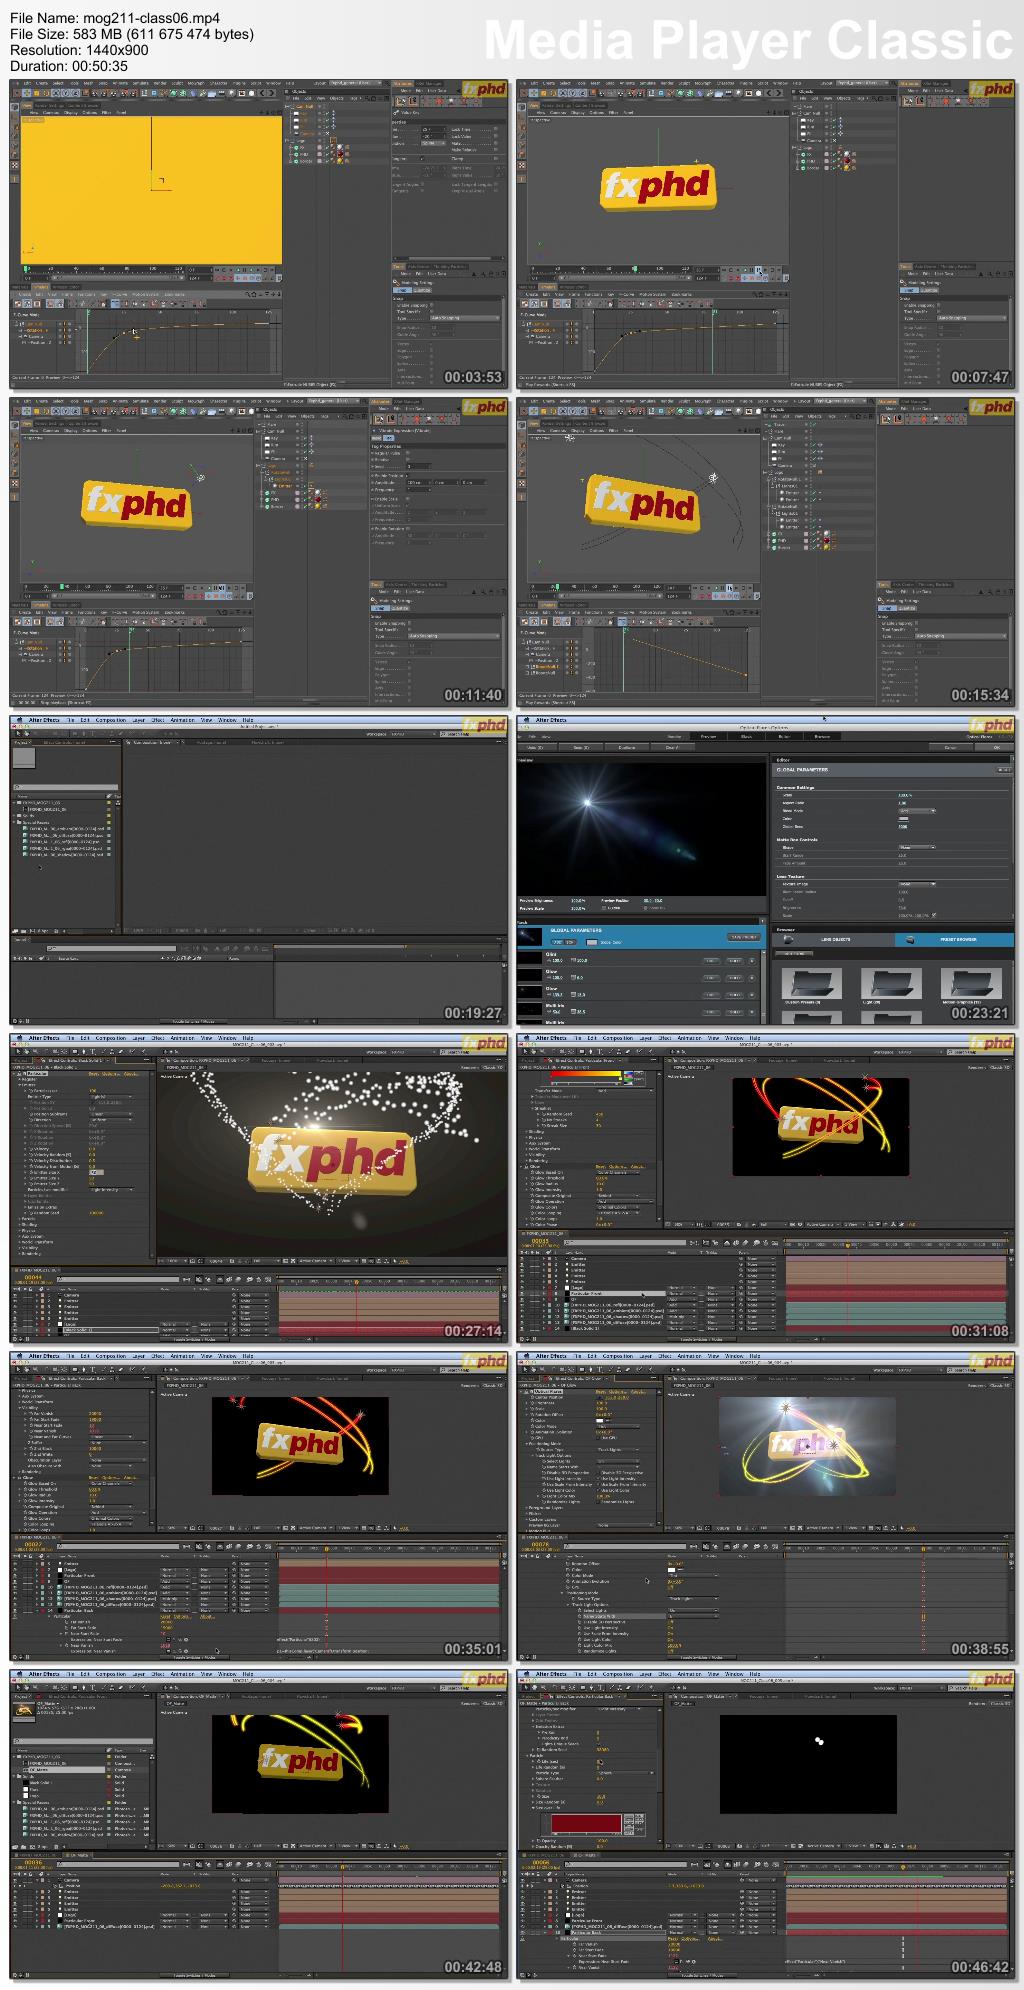 fxphd - MOG211: Cinema4D and After Effects Production Techniques